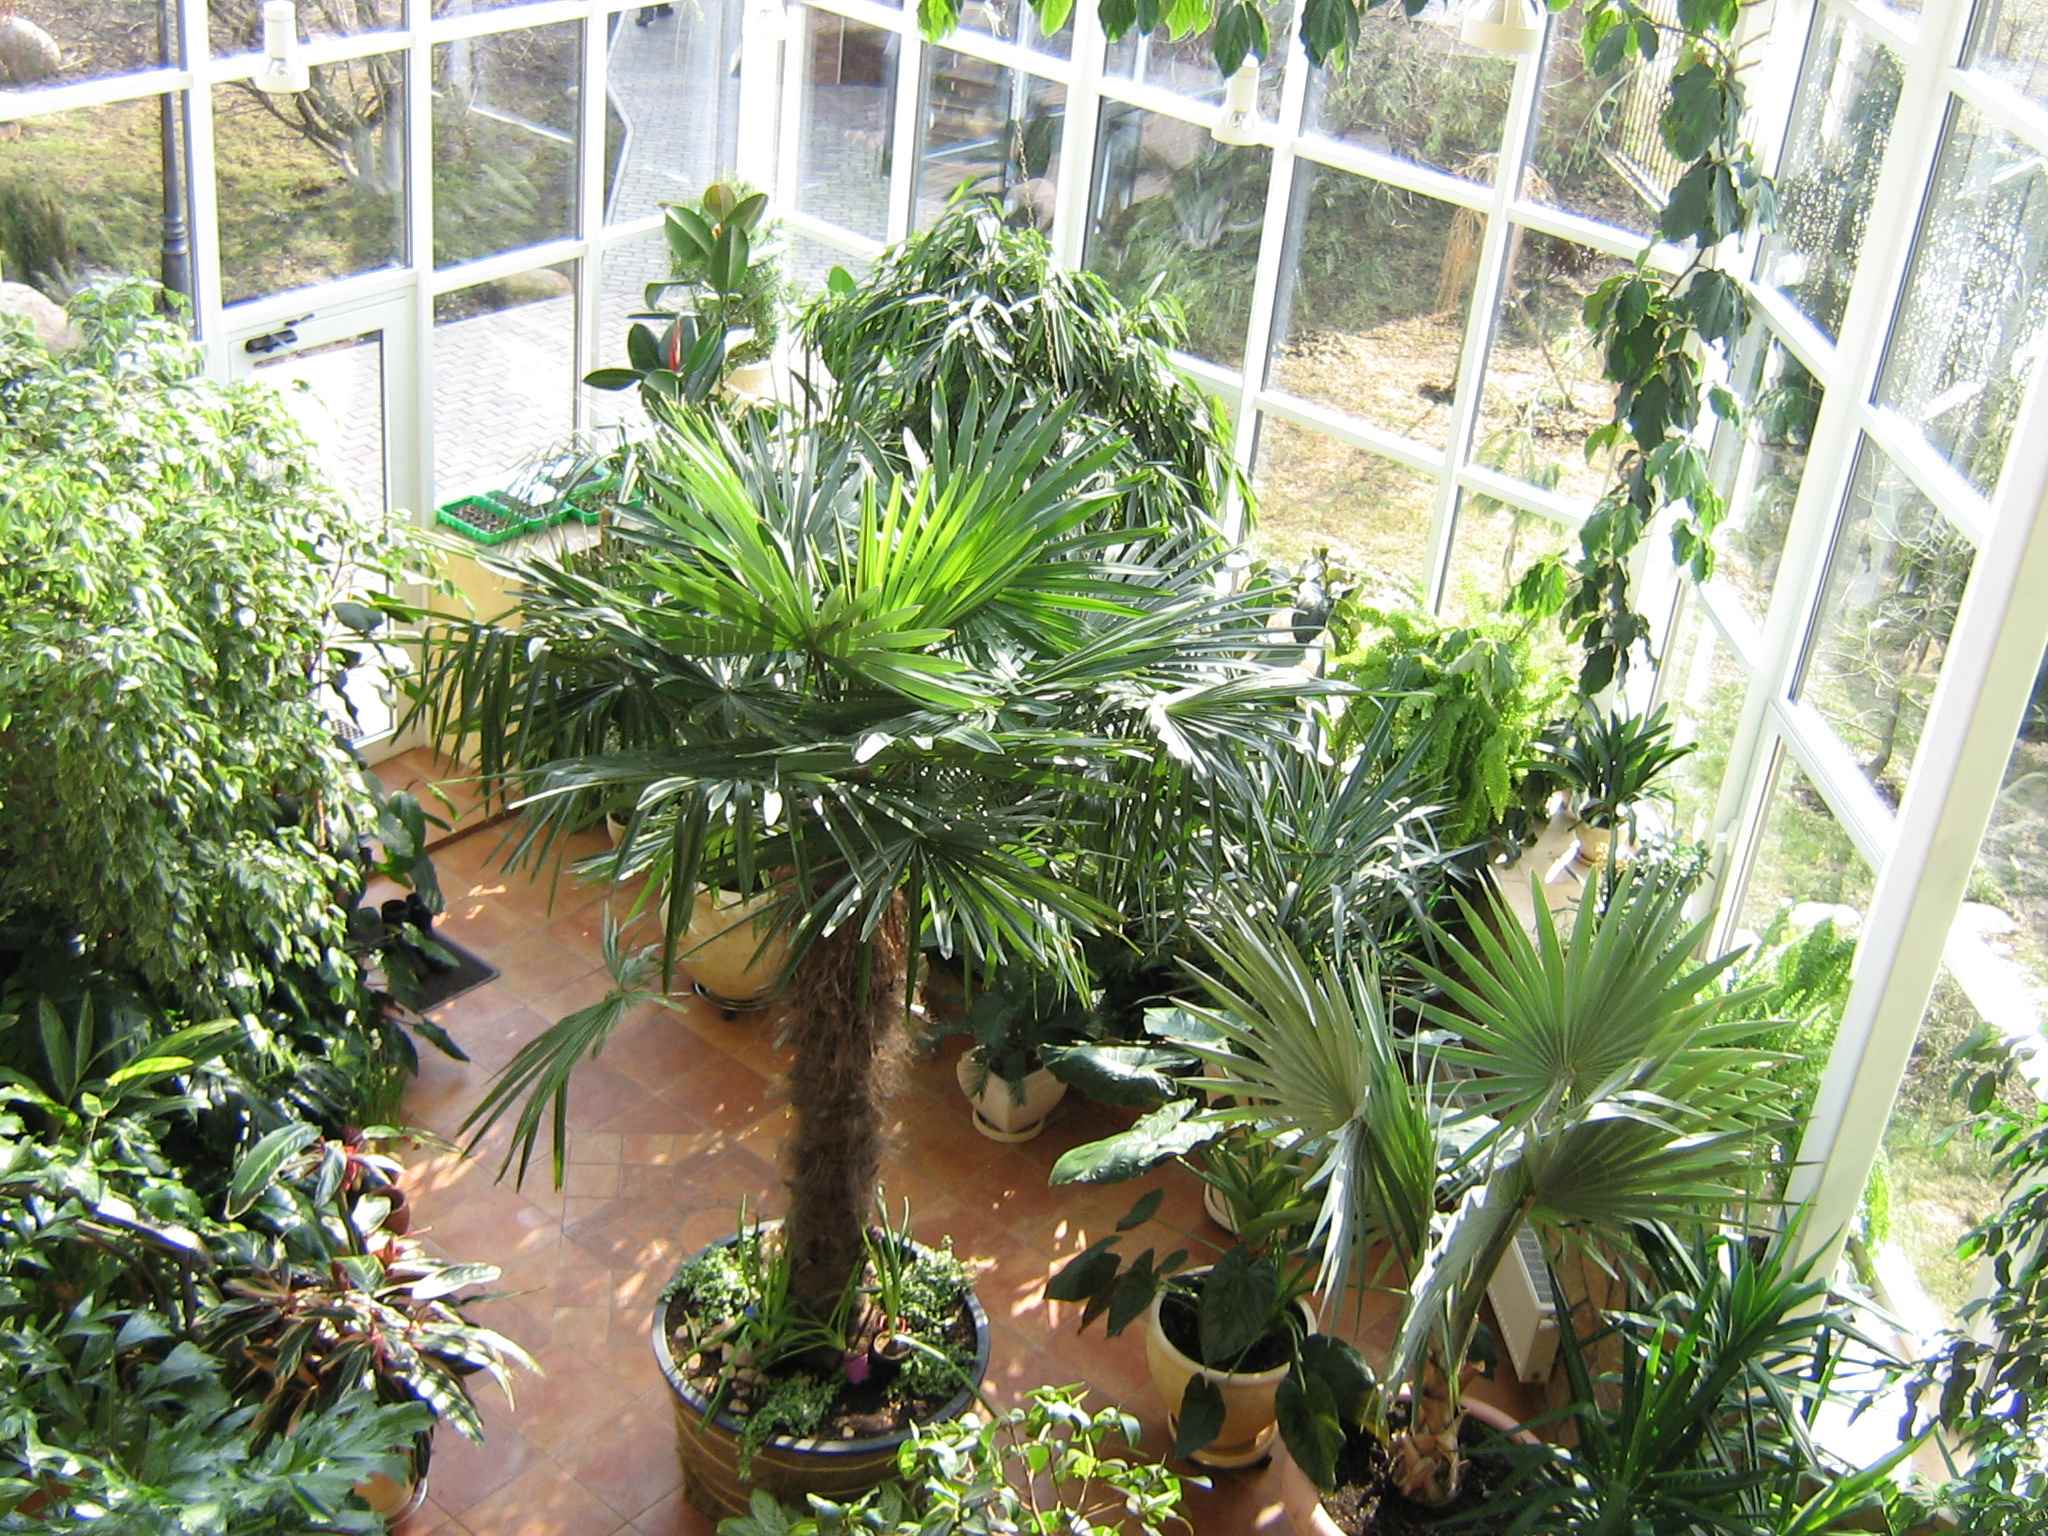 An example of using beautiful ideas for decorating a winter garden